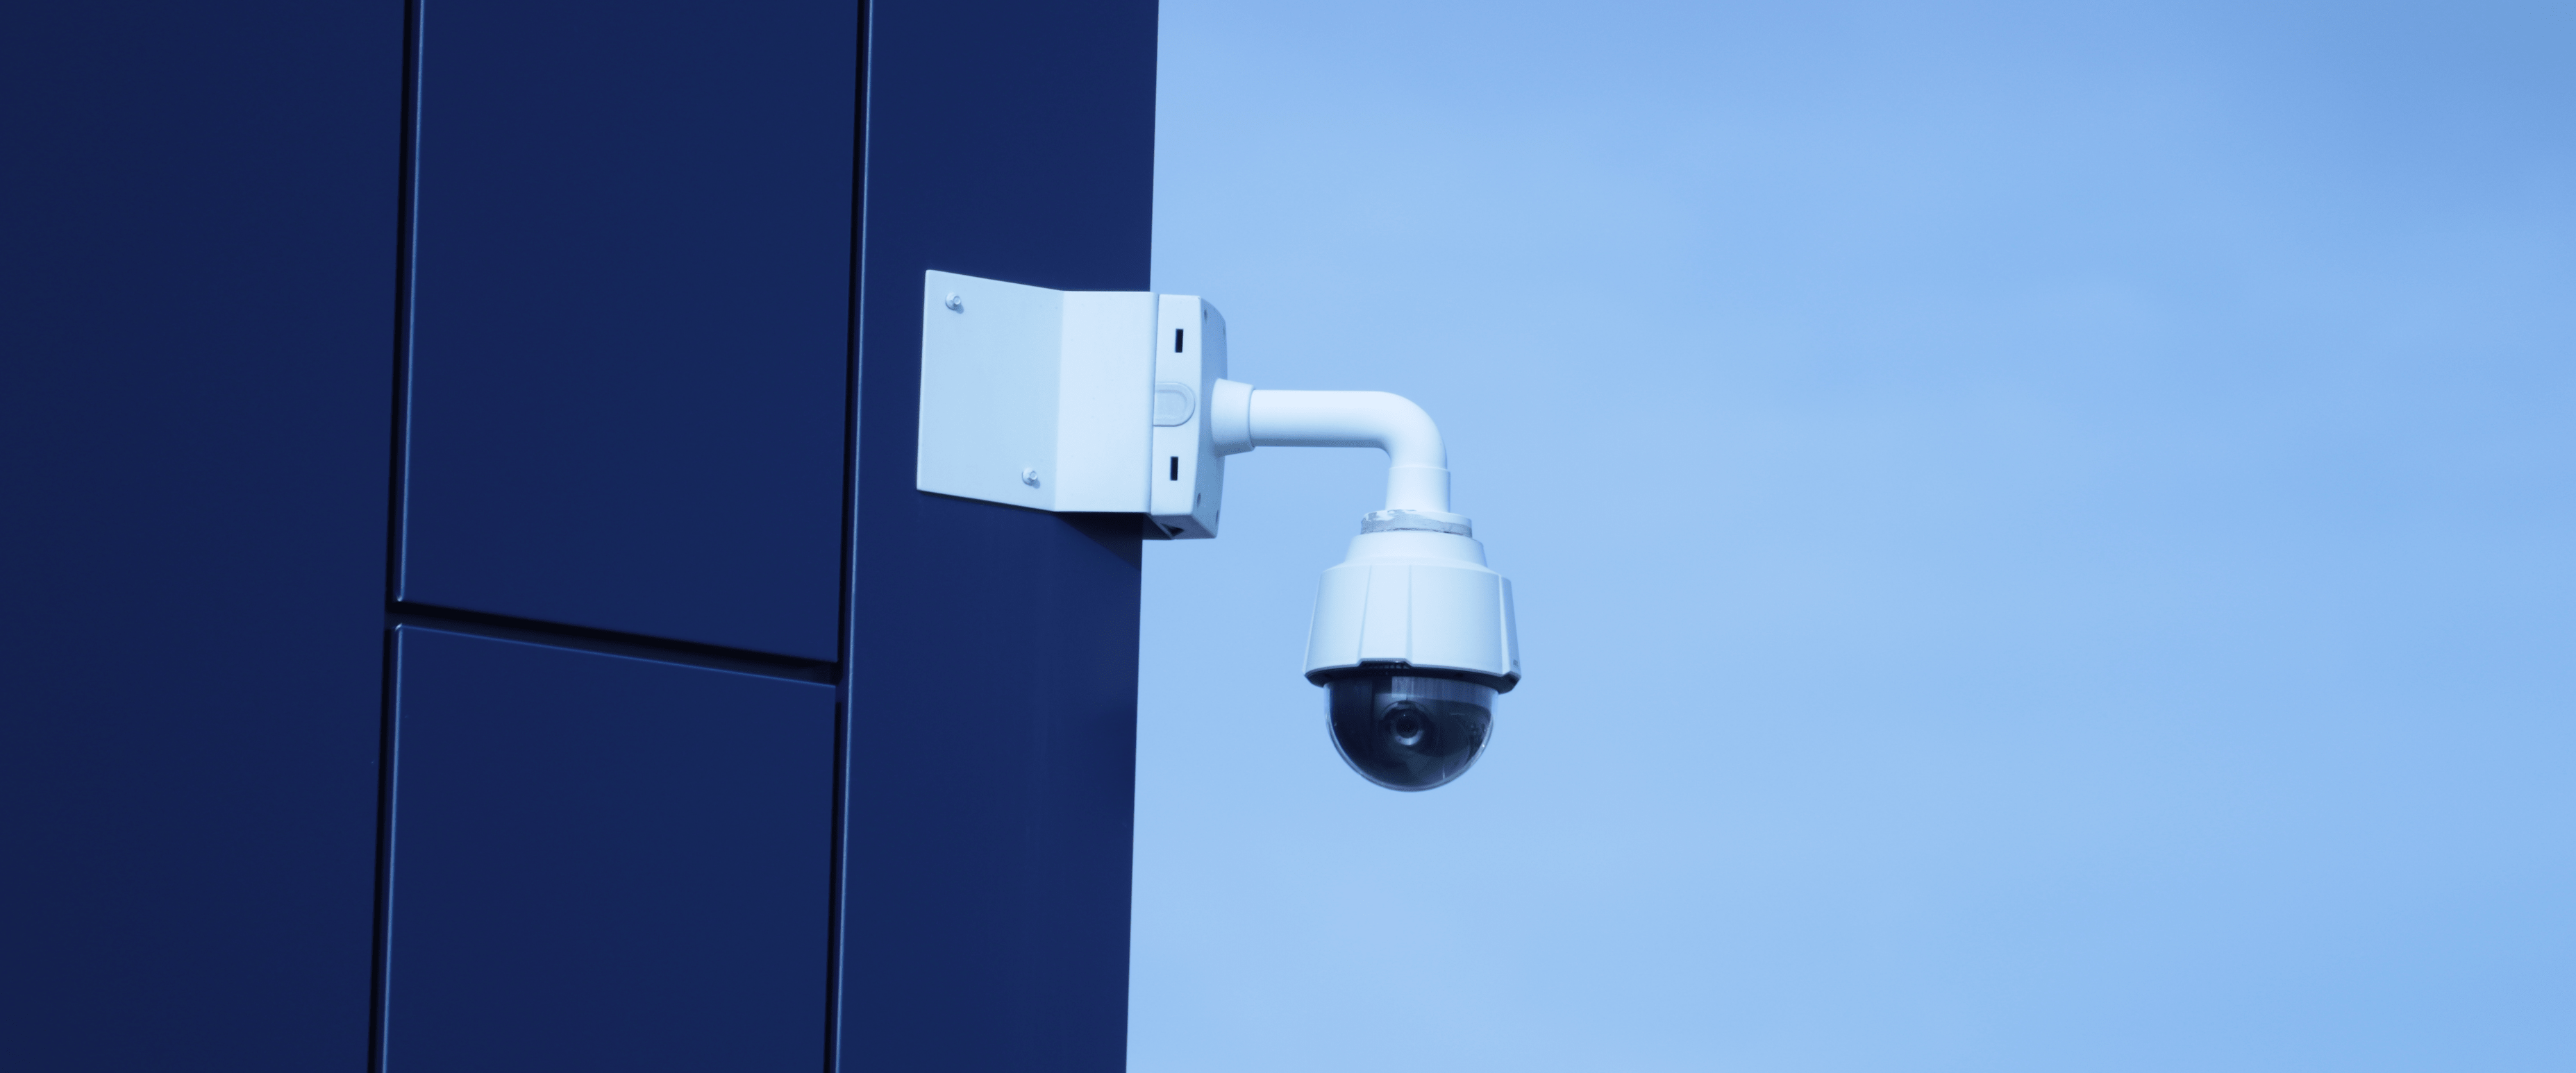 cloud video camera installed on outside of building